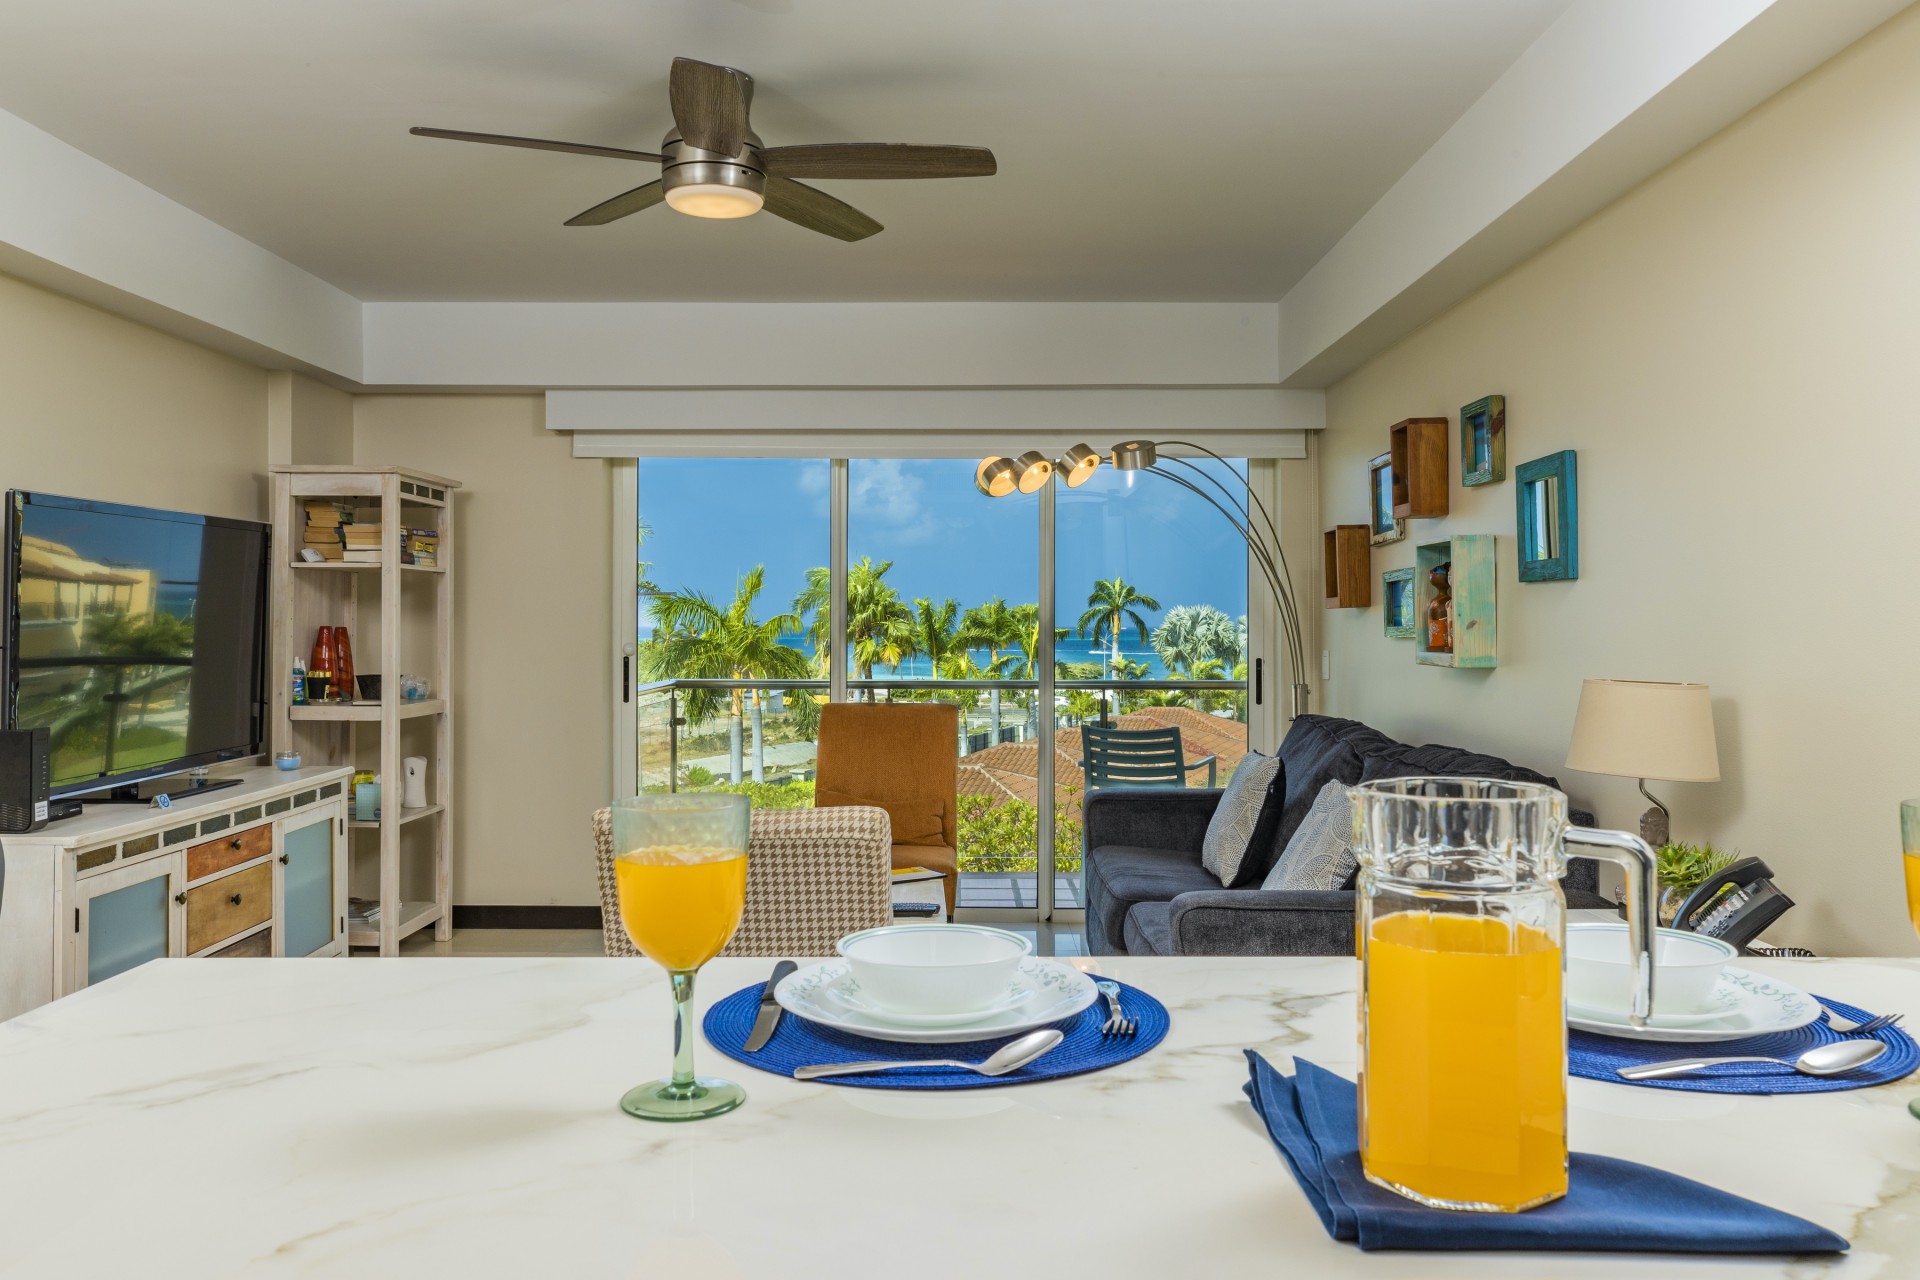 Upgraded Oceania Condo for sale 2 bed/ 2 bath with garage photo 1